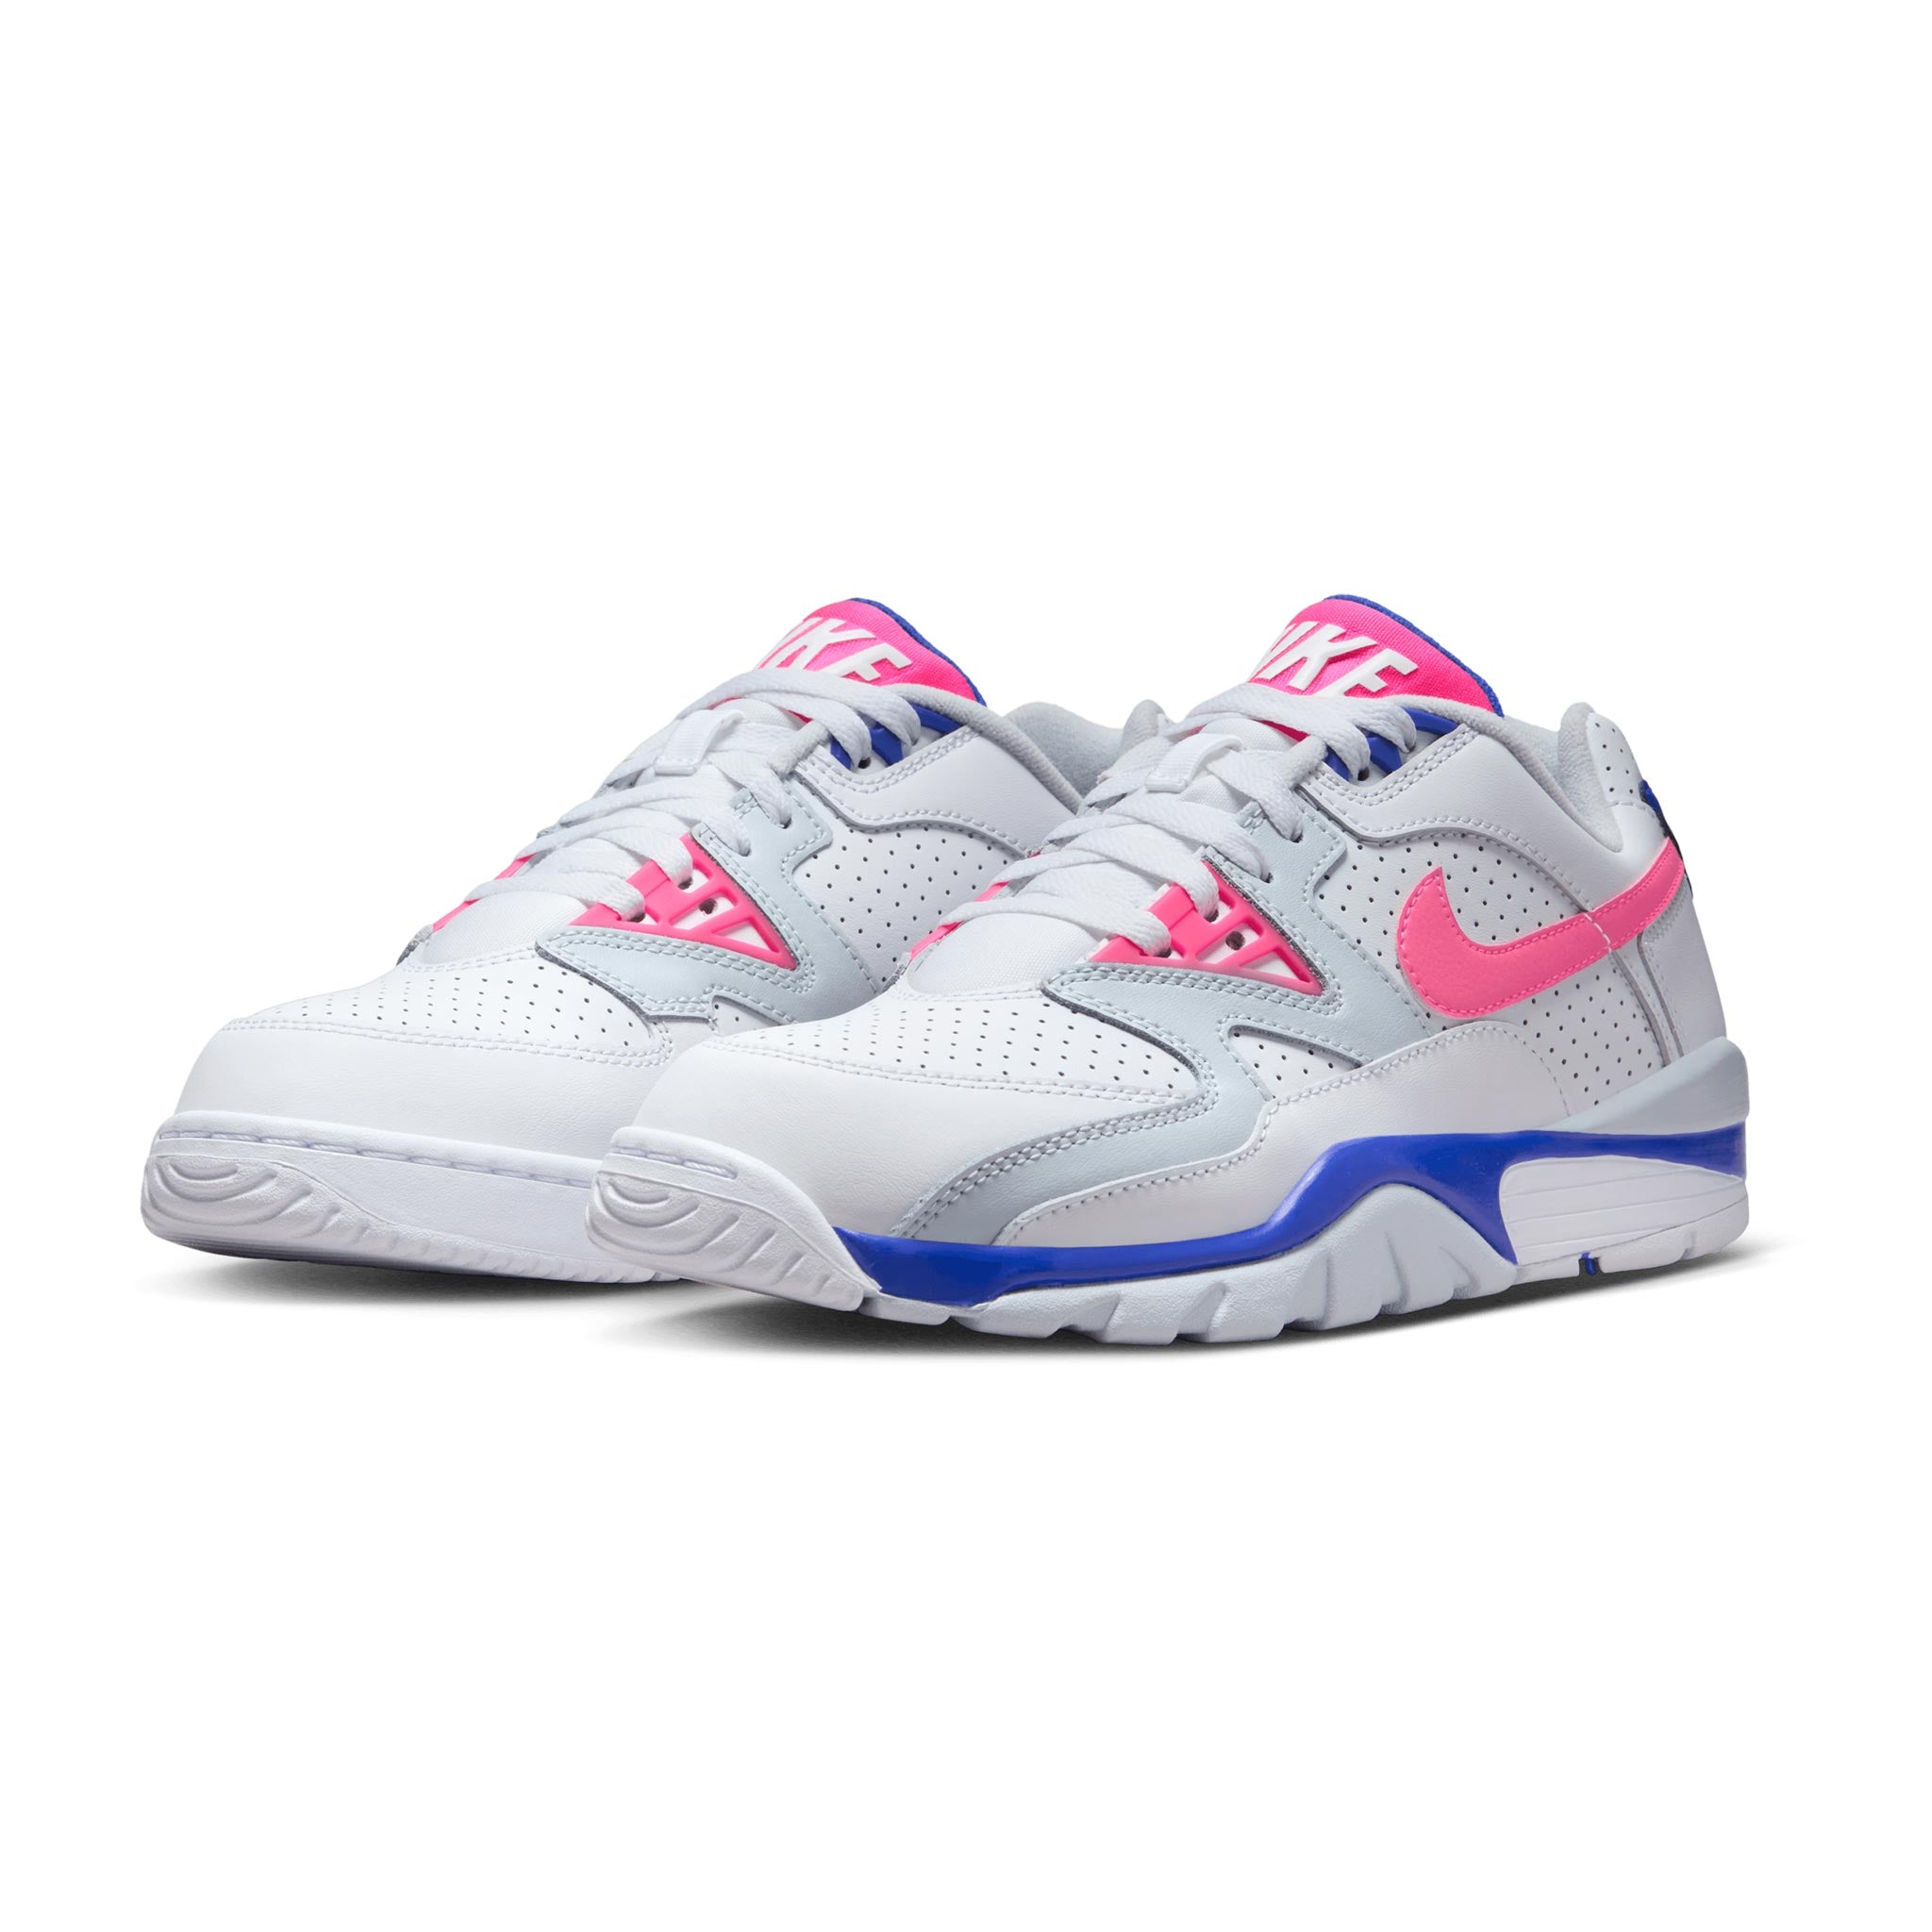 Air Cross Trainer 3 Low FN6887-100 White